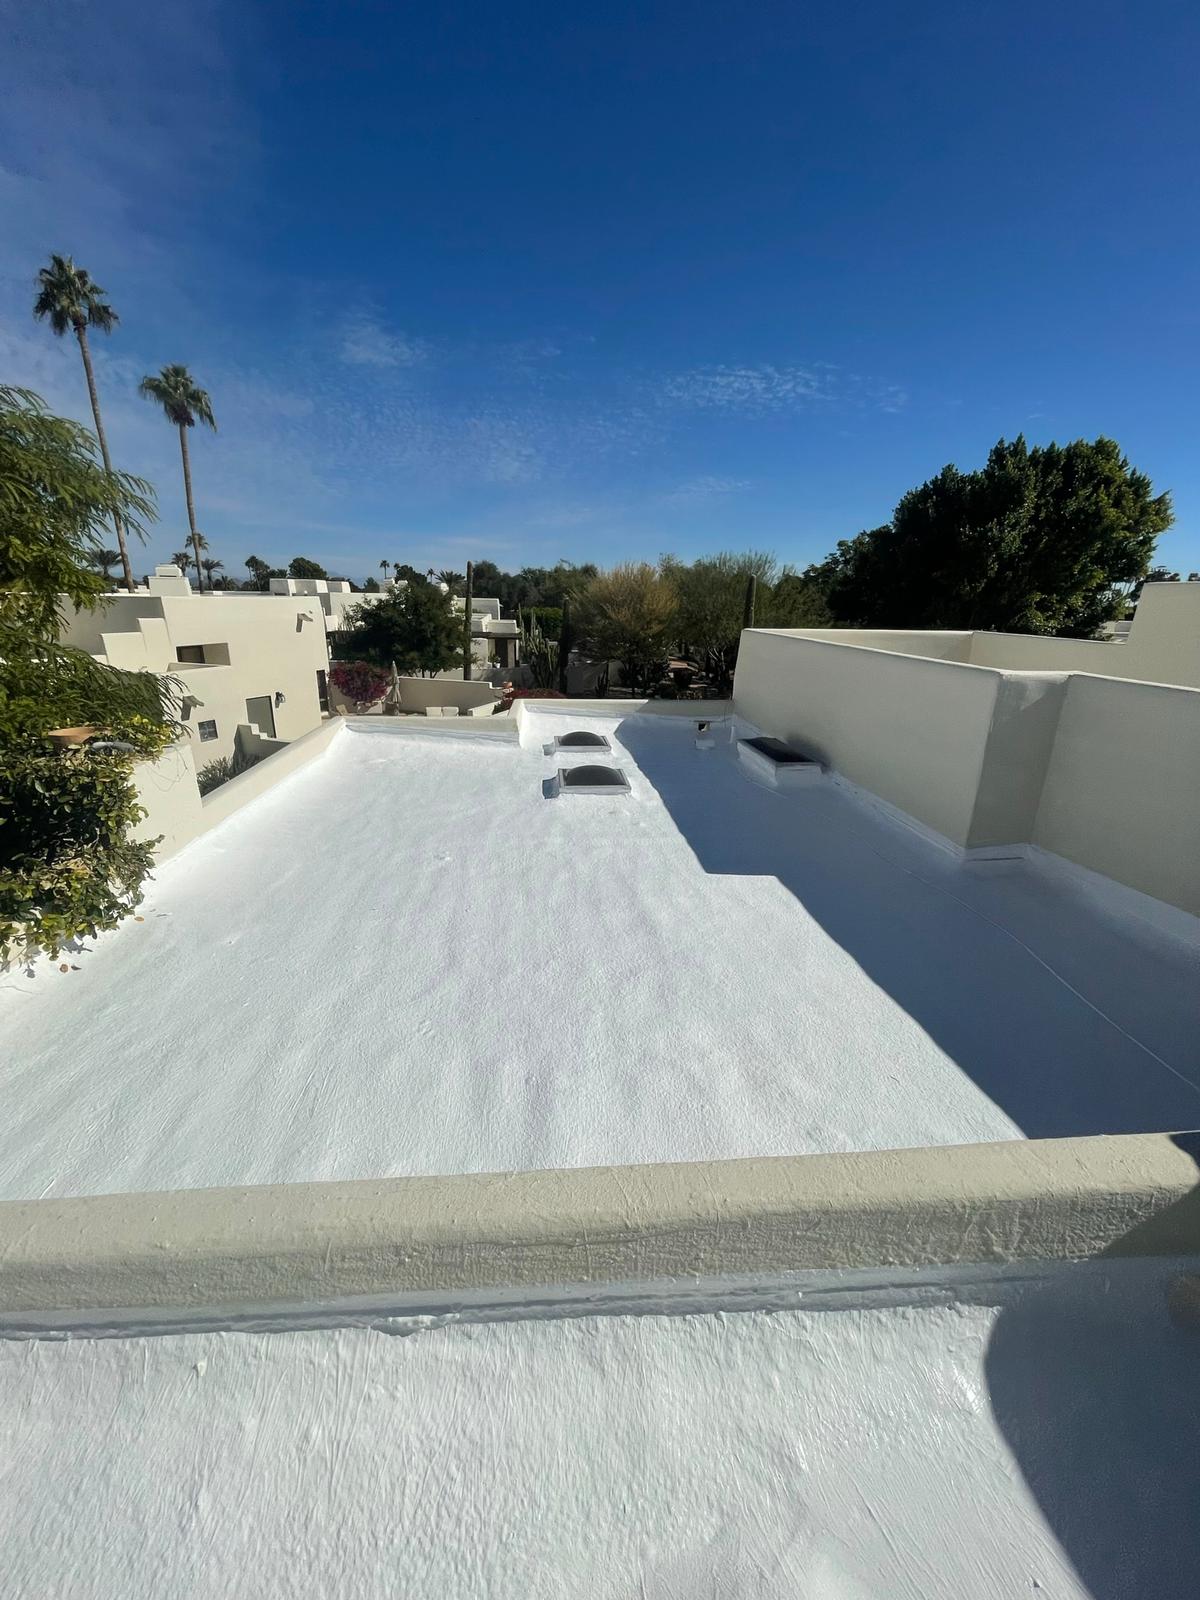 Close-up shot of a spray foam roof on a residential building in Silverleaf.